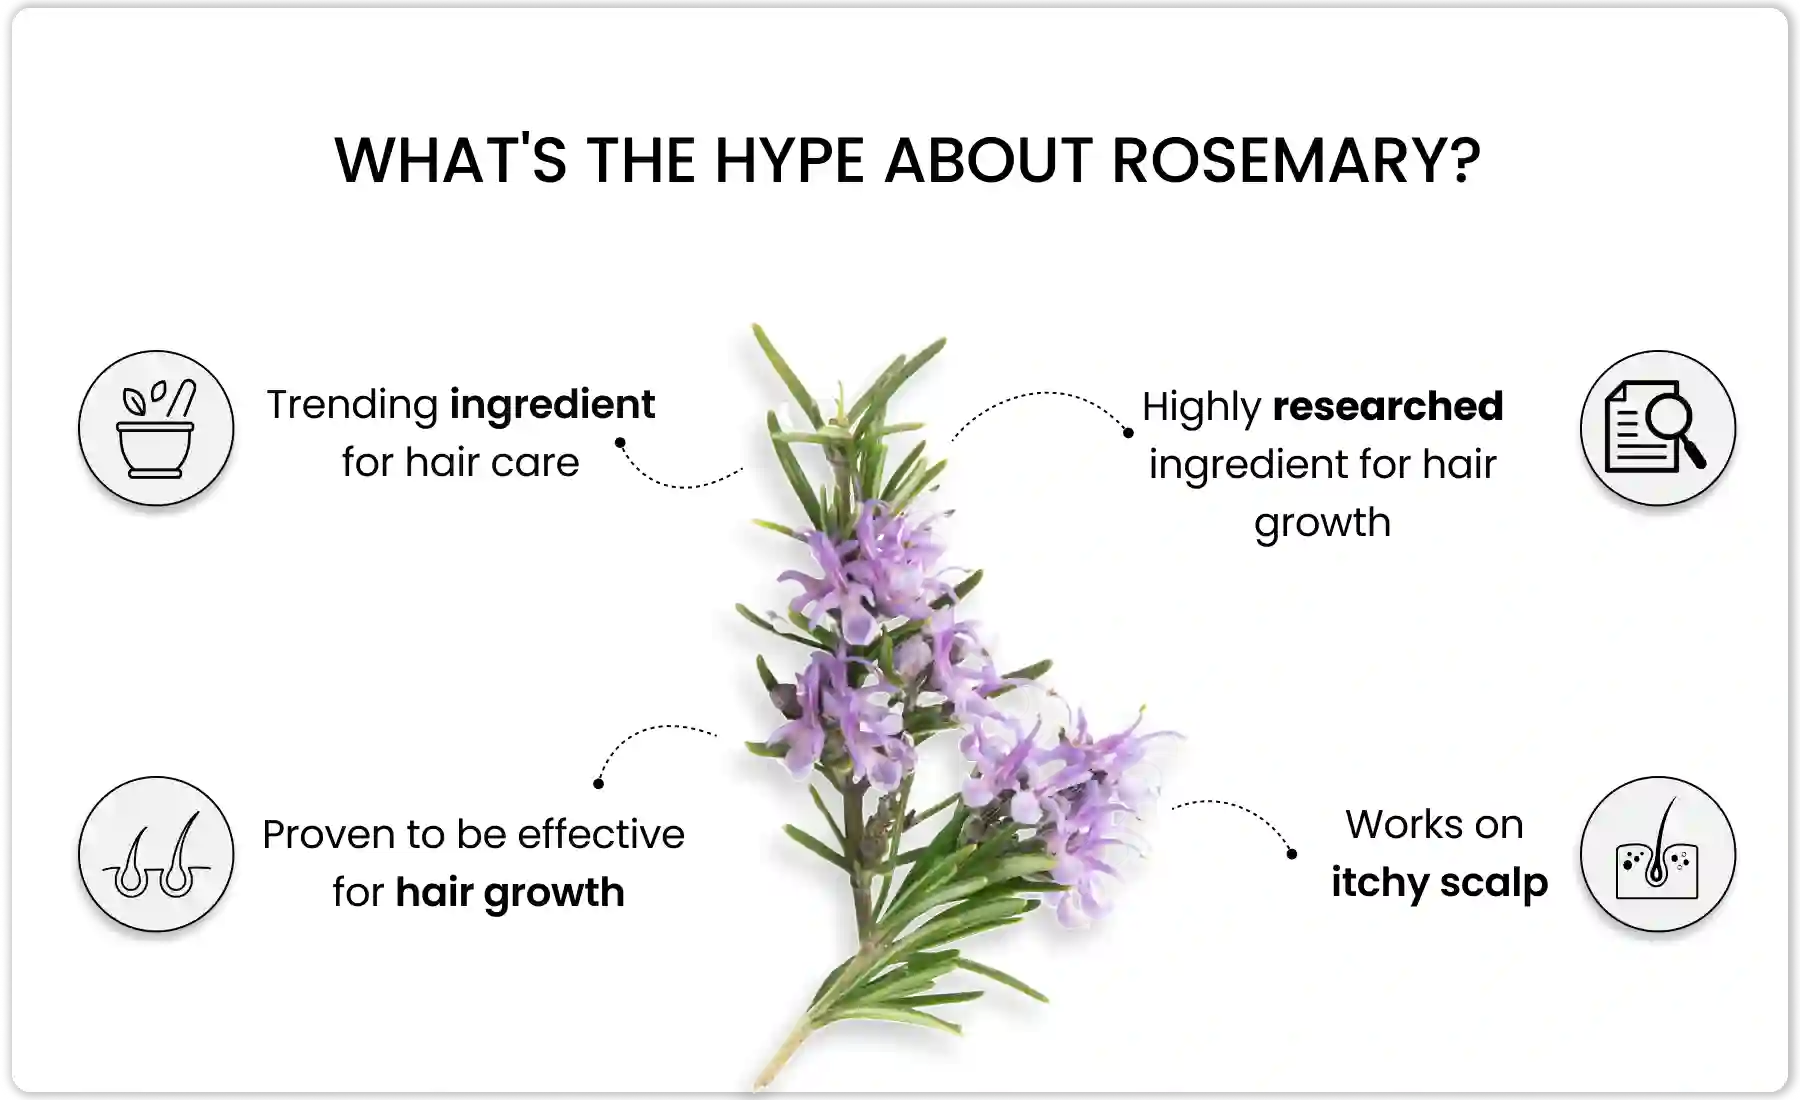 reasons why rosemary is the best ingredient for hair care